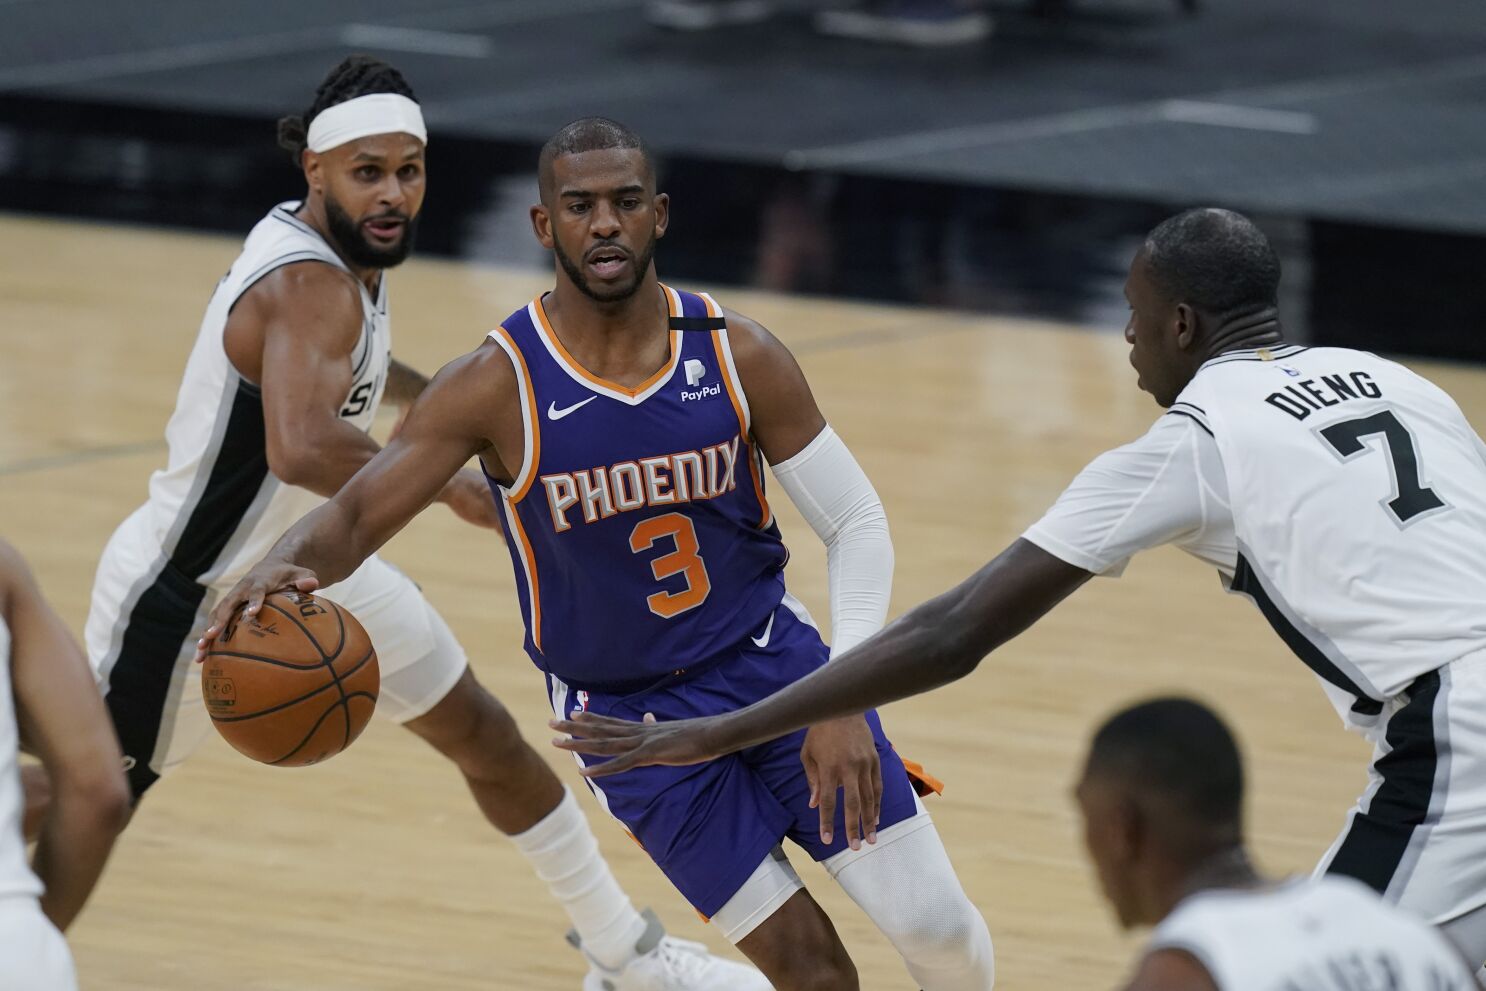 Phoenix Suns work outs before, after games to endure through NBA grind